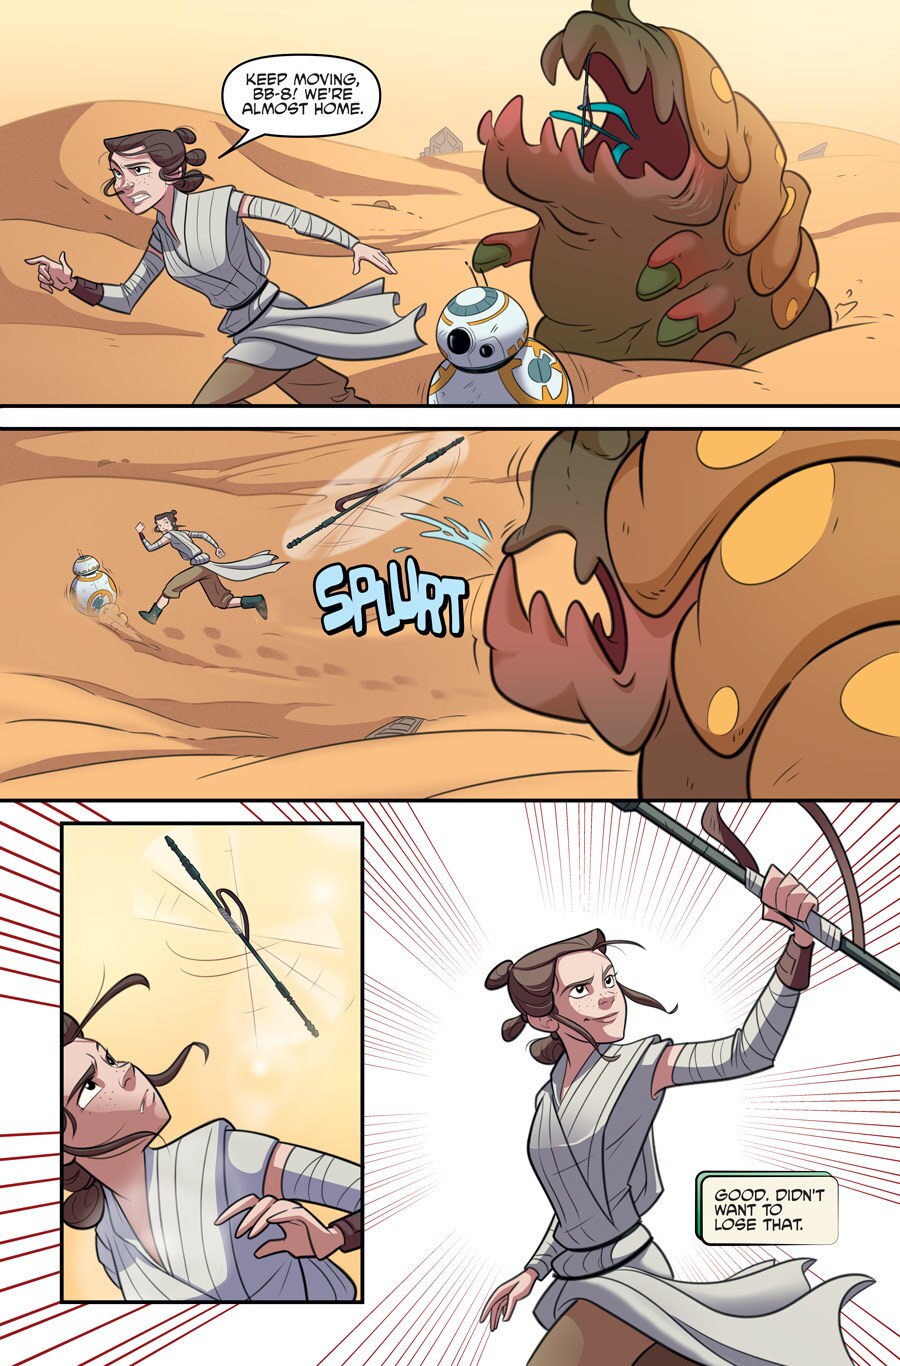 Rey and BB-8 run from a nightwatcher worm in the Jakku desert in a page from the comic book Star Wars Forces of Destiny: Rey.